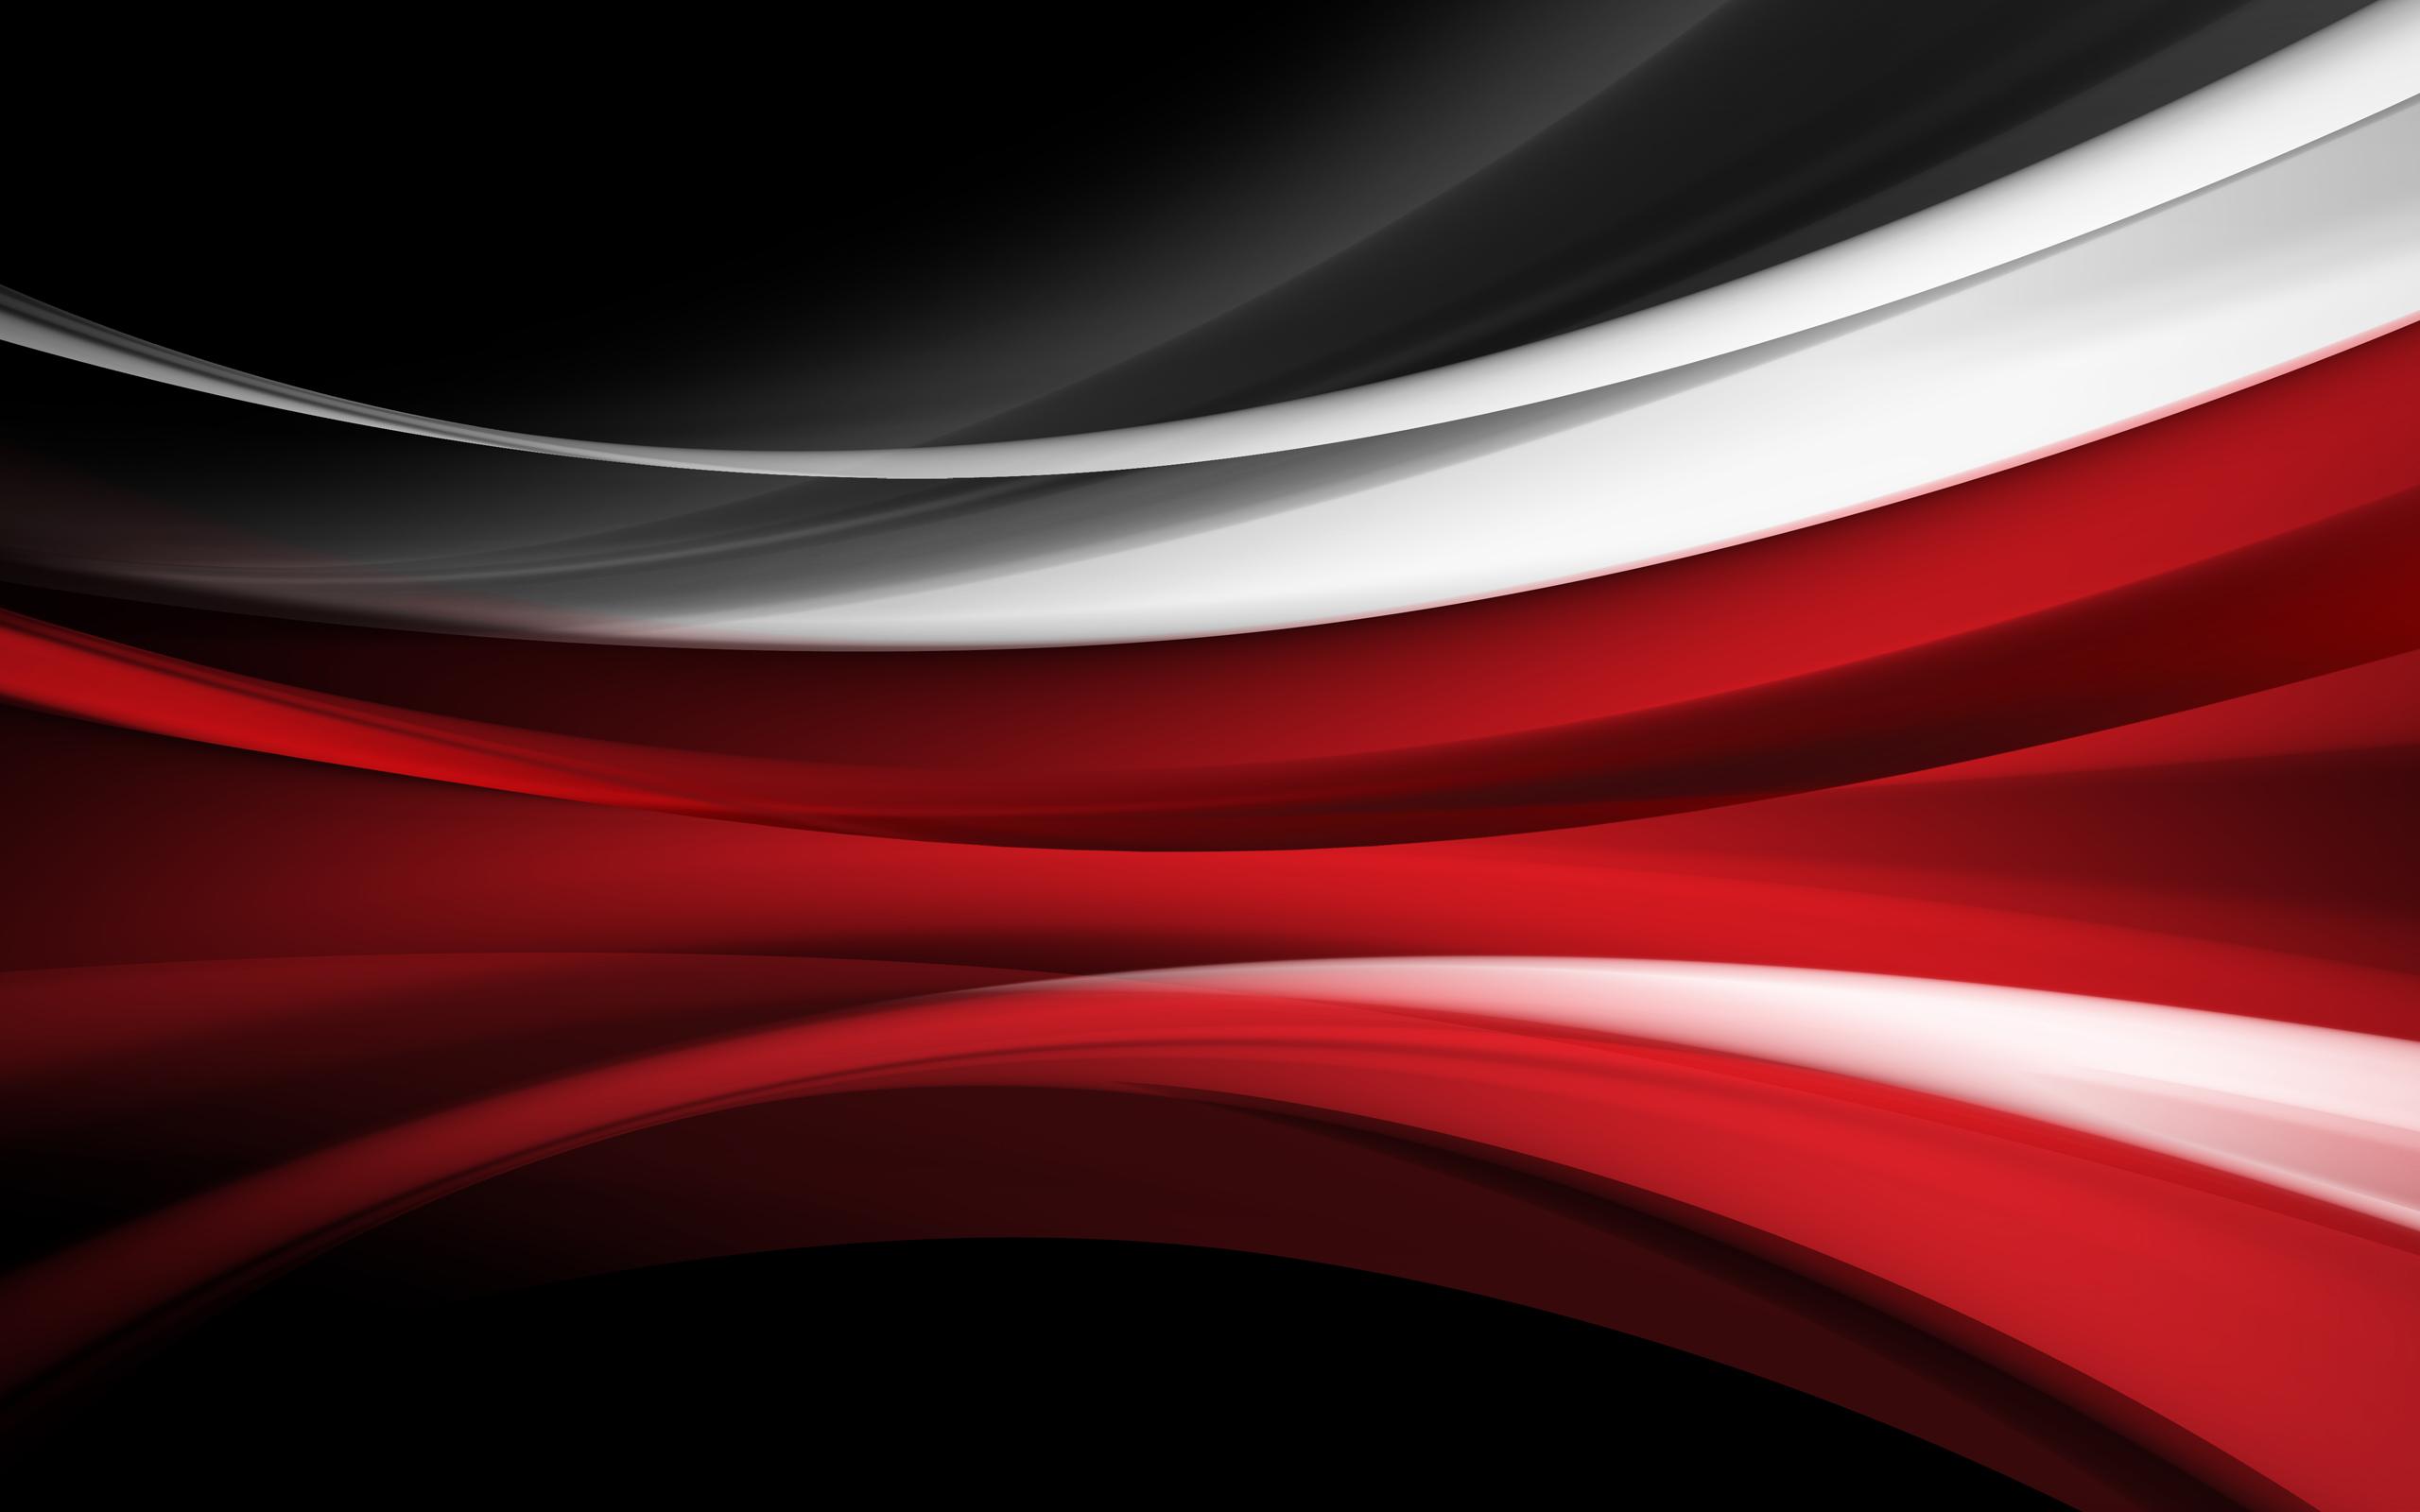 Free Hd Black And Red Wallpapers - Pixelstalk.net